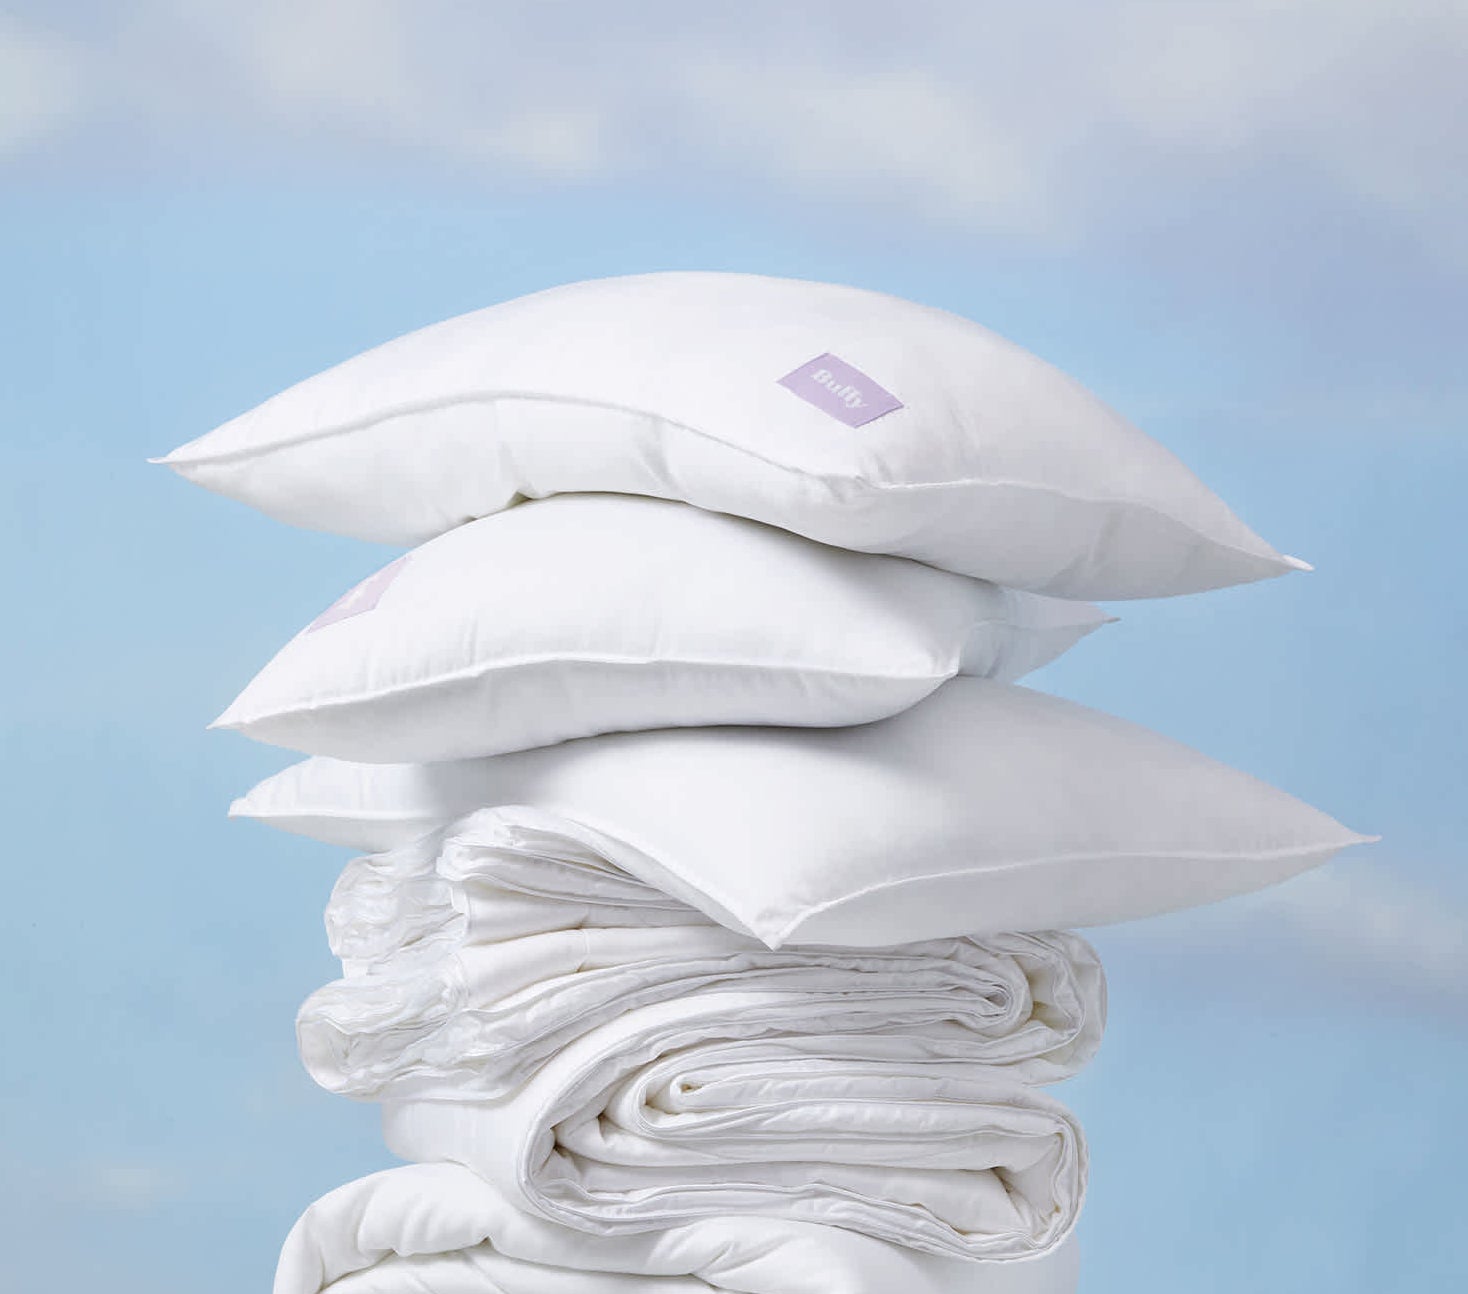 a stack of pillows on top of a stack of comforters